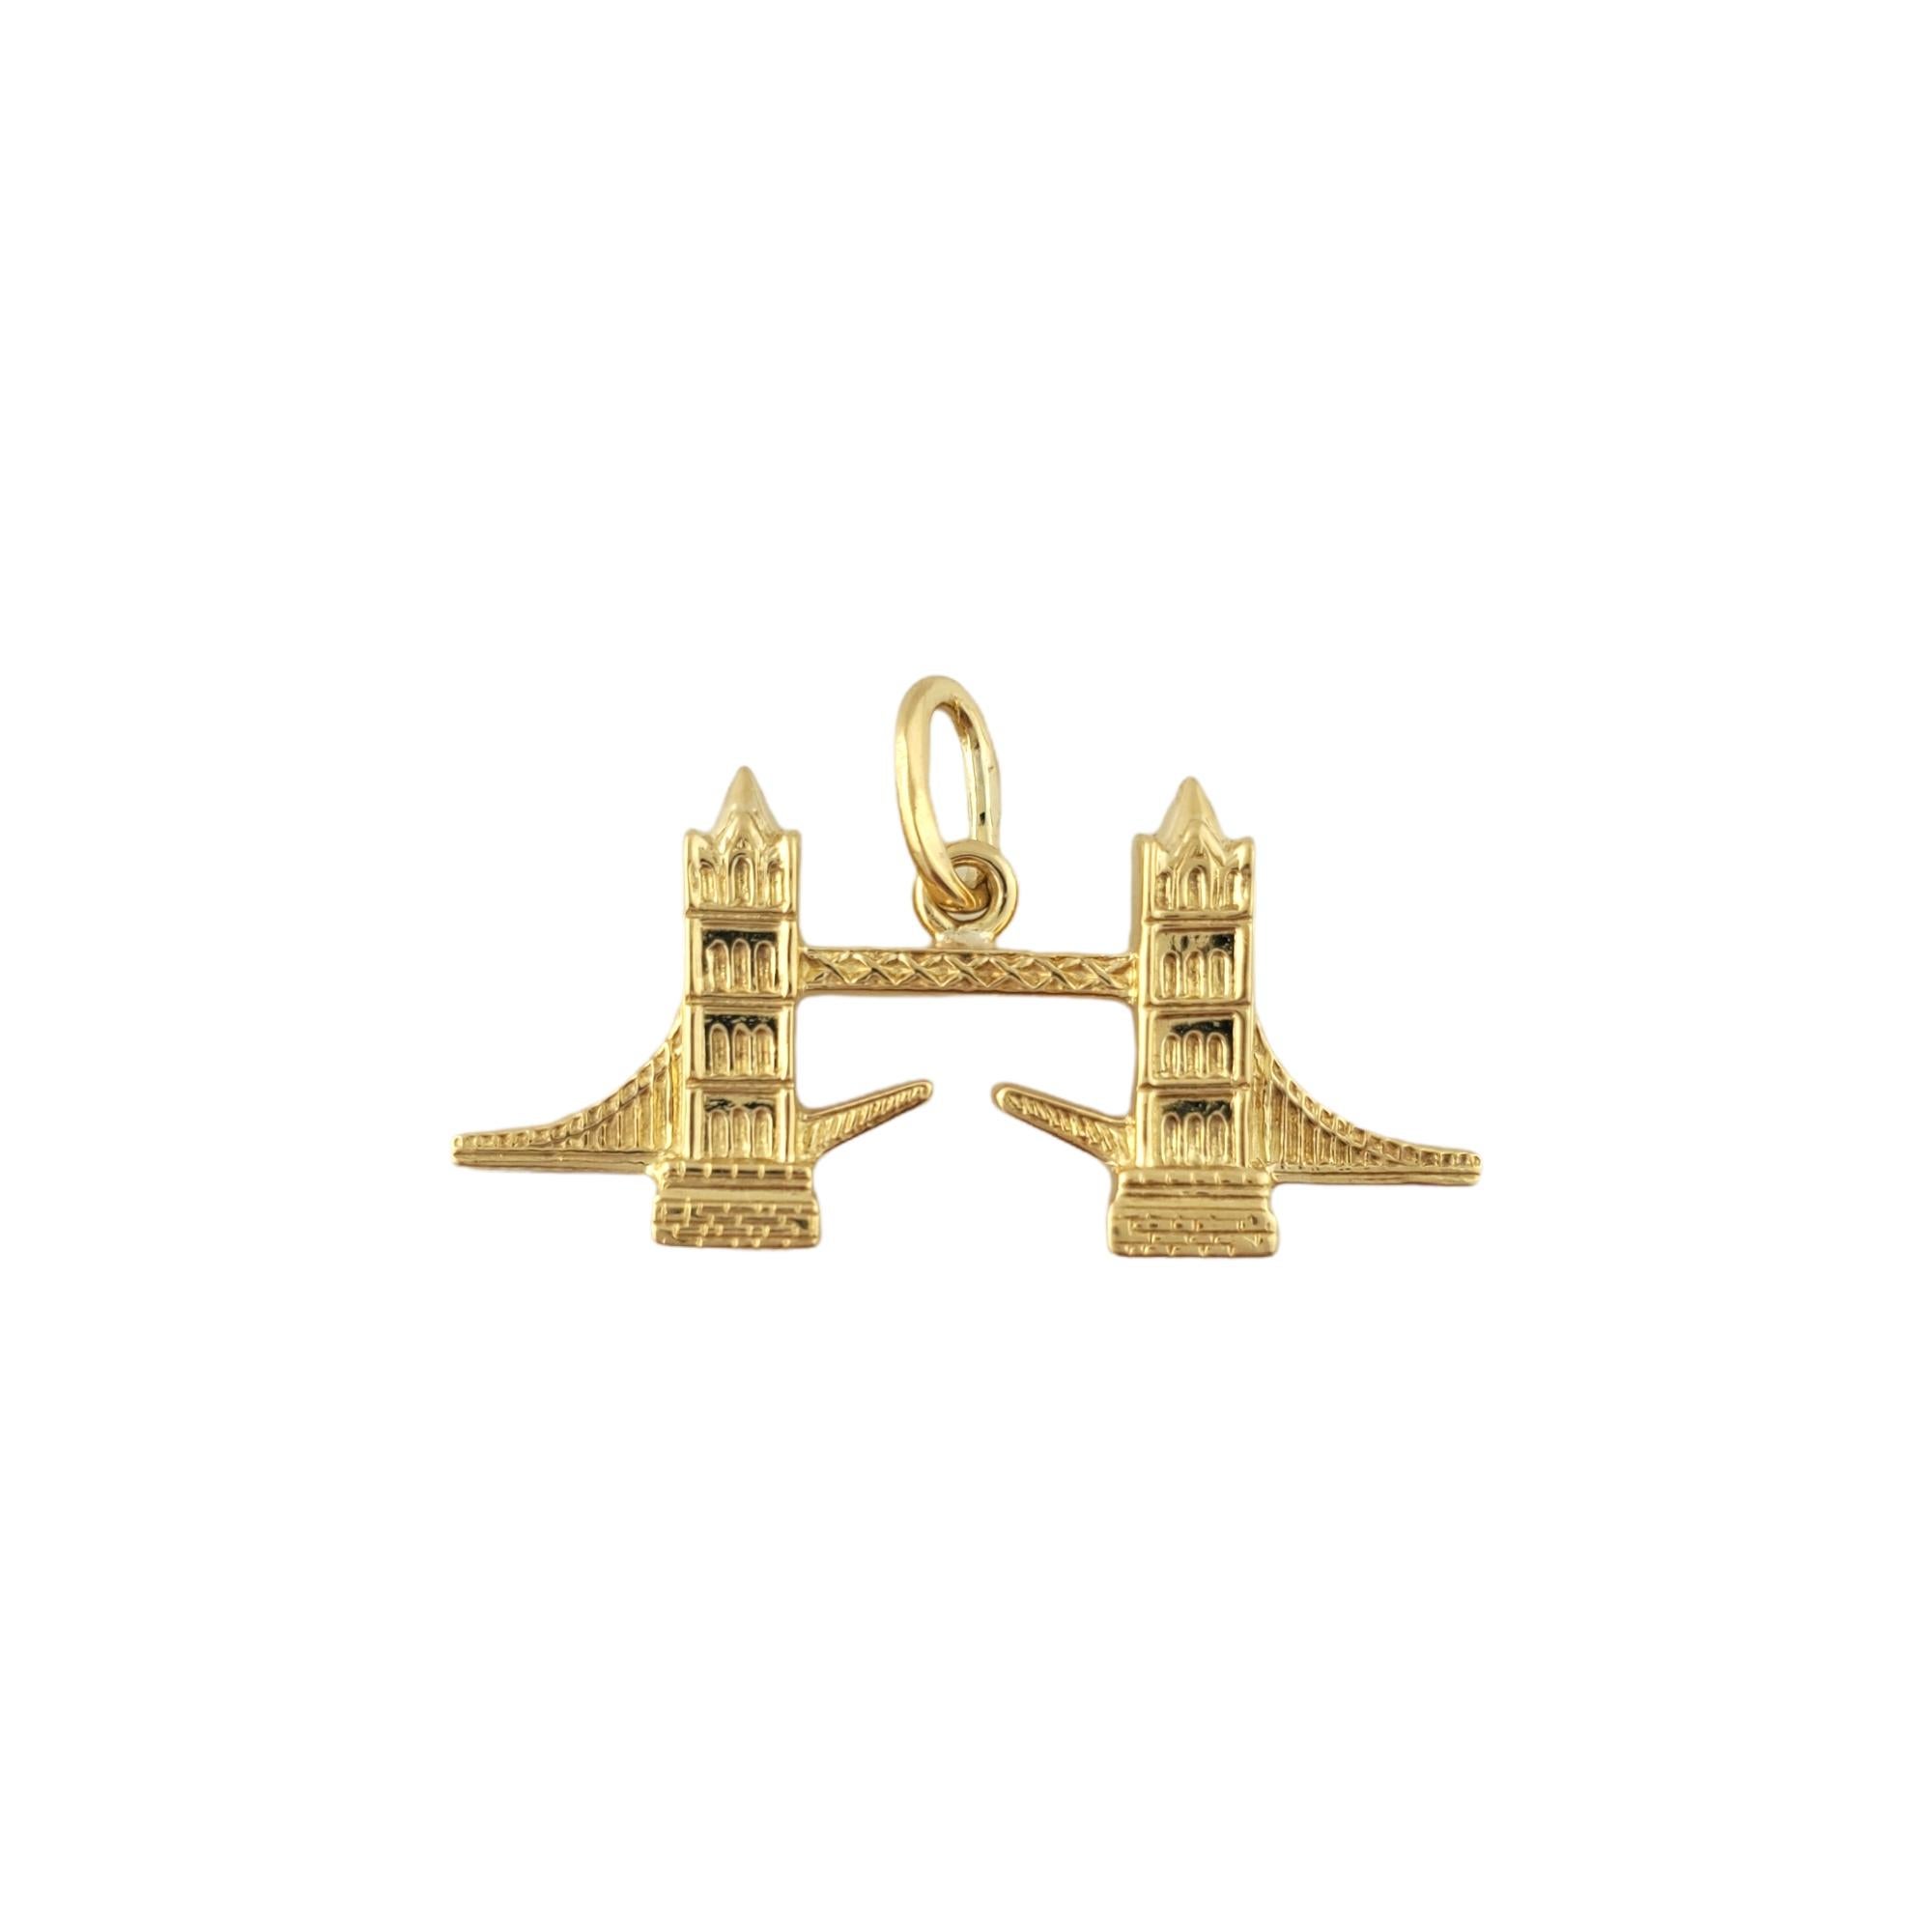 Vintage 18K Yellow Gold London Bridge Charm

This beautifully detailed piece models the London Bridge, built in 1967, with intricate designs in 18K yellow gold.

Size: 30 mm X 13 mm

Weight 4.5 g/ 2.8 dwt

Hallmark: 750

Very good condition,